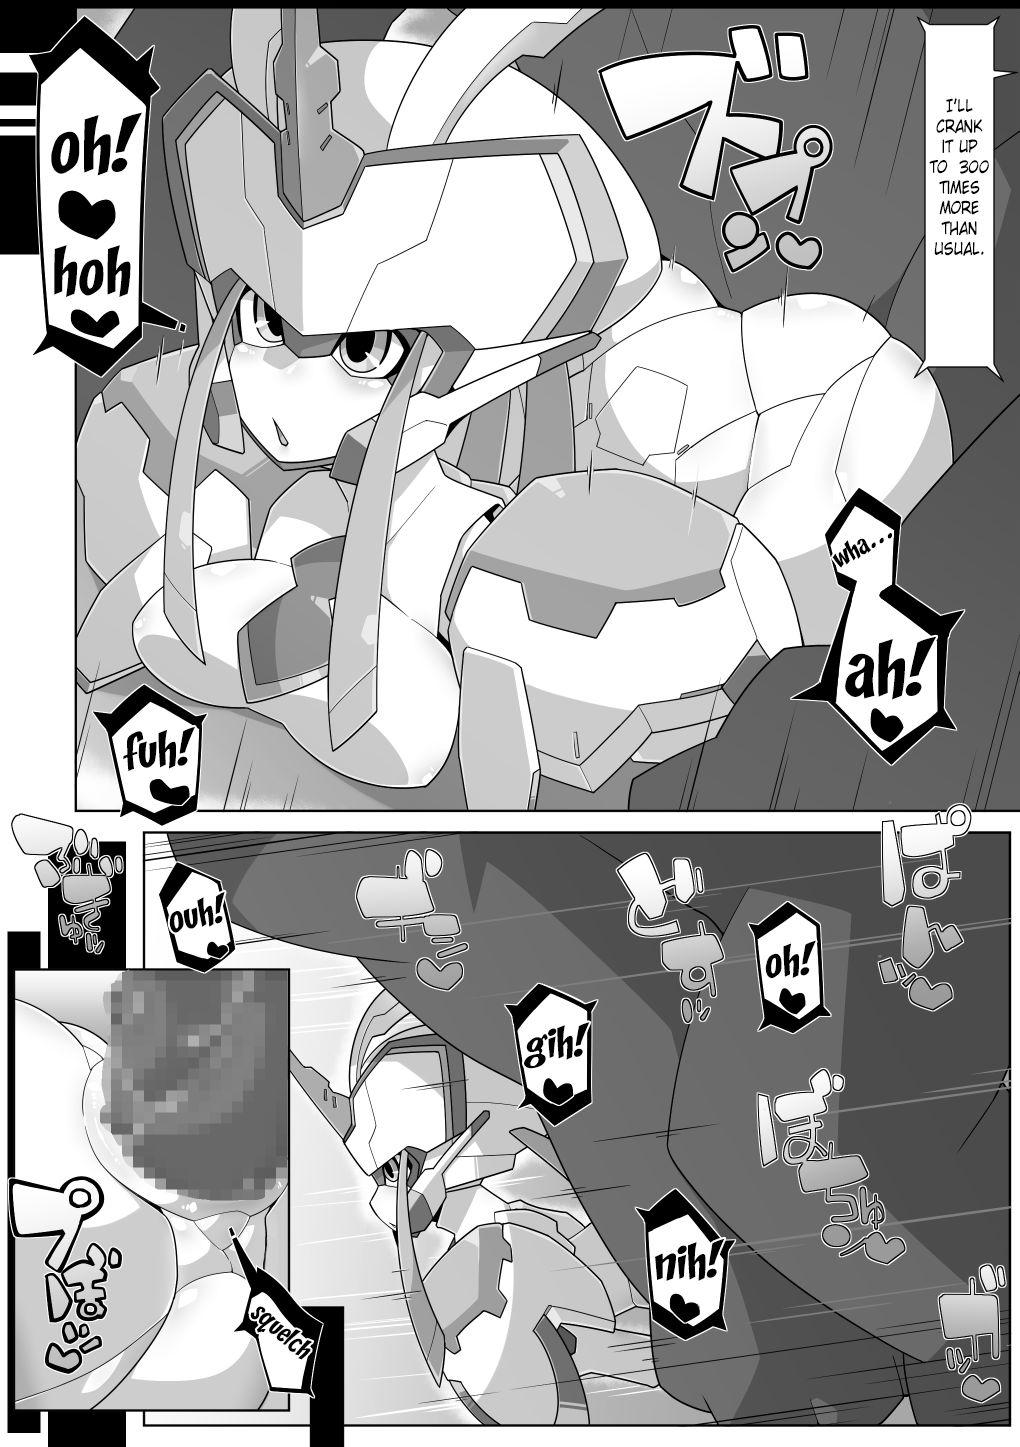 Teenxxx (C94) [Workaholic (Kni)] robo-hentai-book - Darling in the franxx Domination - Page 4